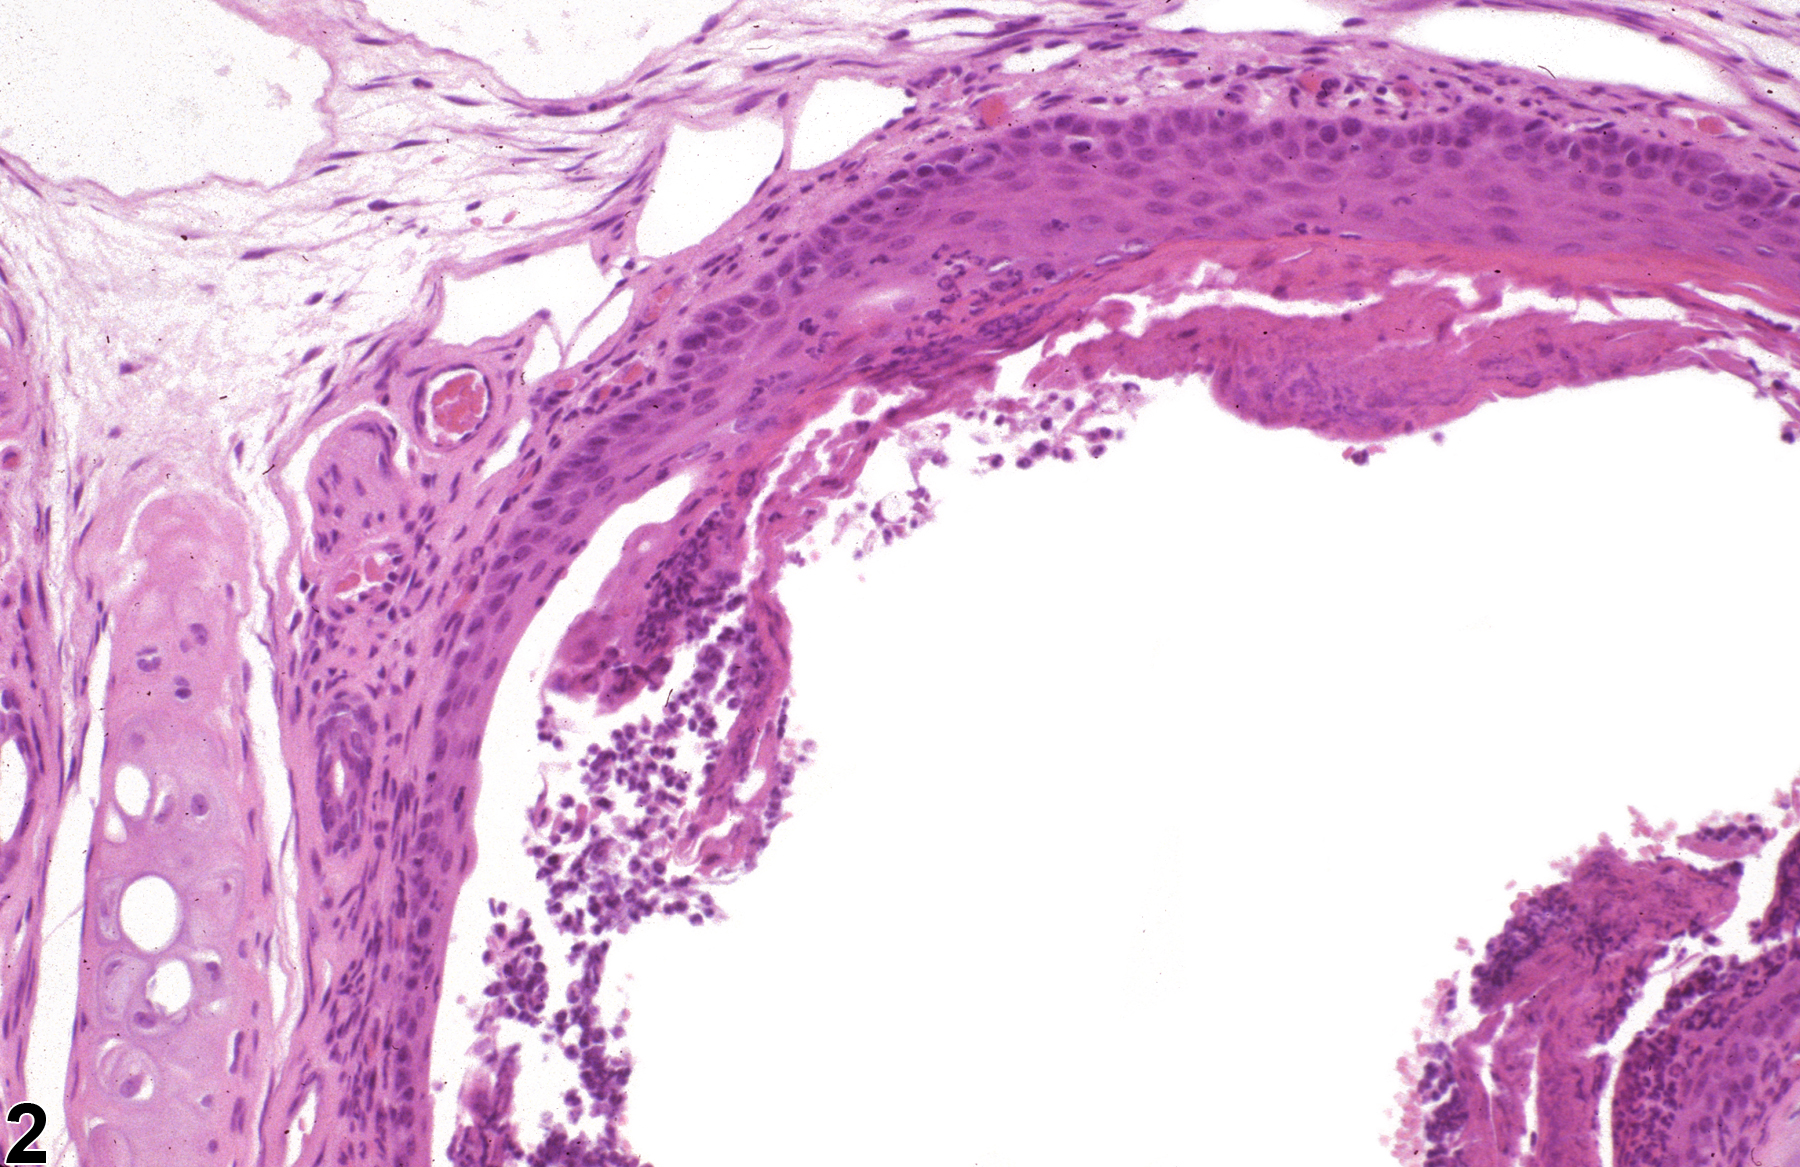 Image of metaplasia, squamous in the nose, respiratory epithelium from a female B6C3F1/N mouse in a chronic study